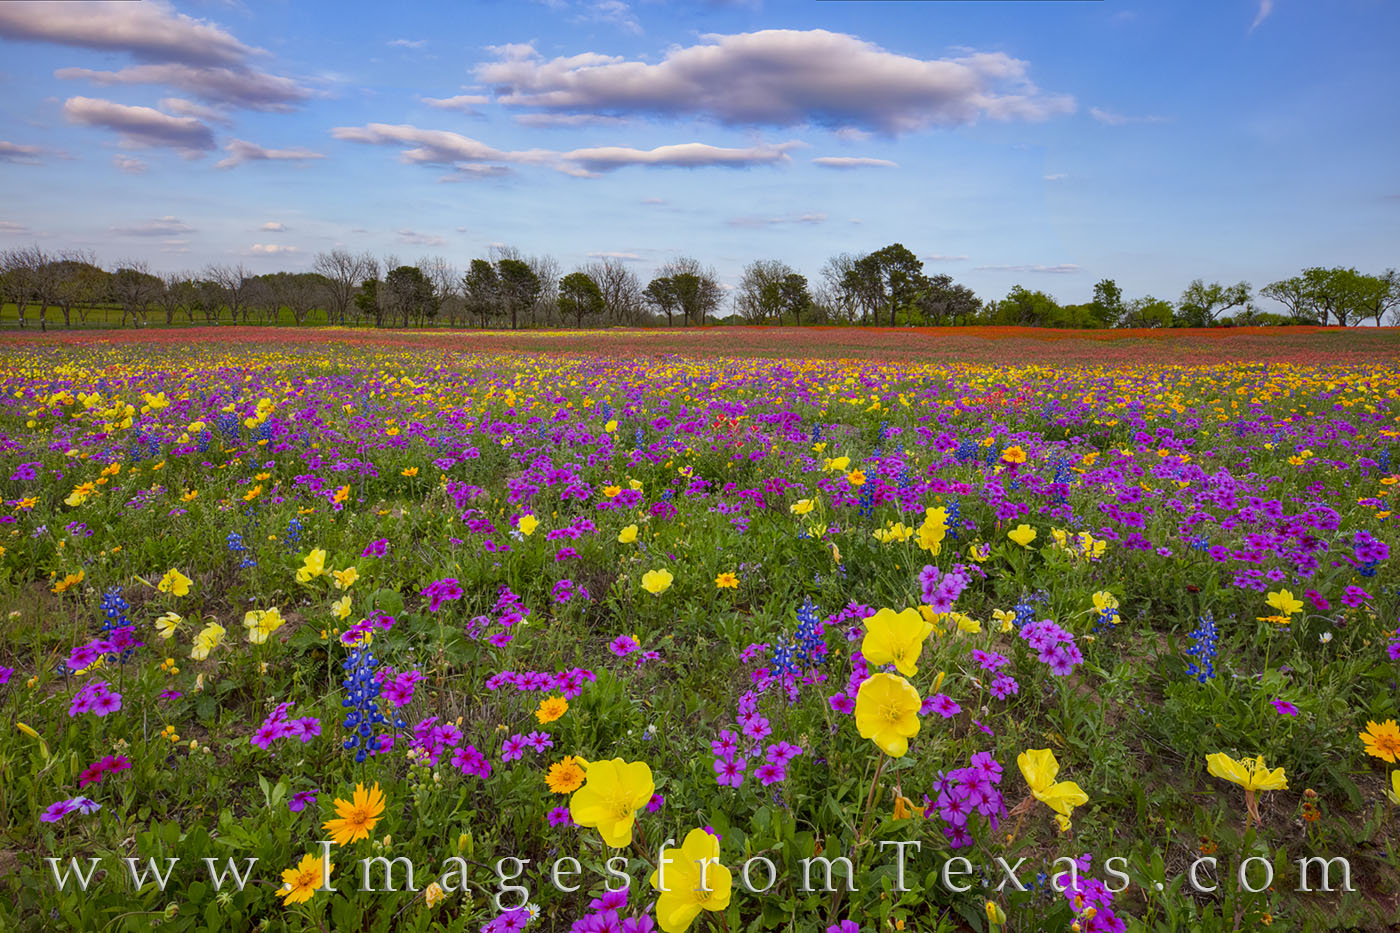 Wildflowers of purple and gold and red fill this pasture near New Berlin, Texas, on this late afternoon. The colors were vibrant...